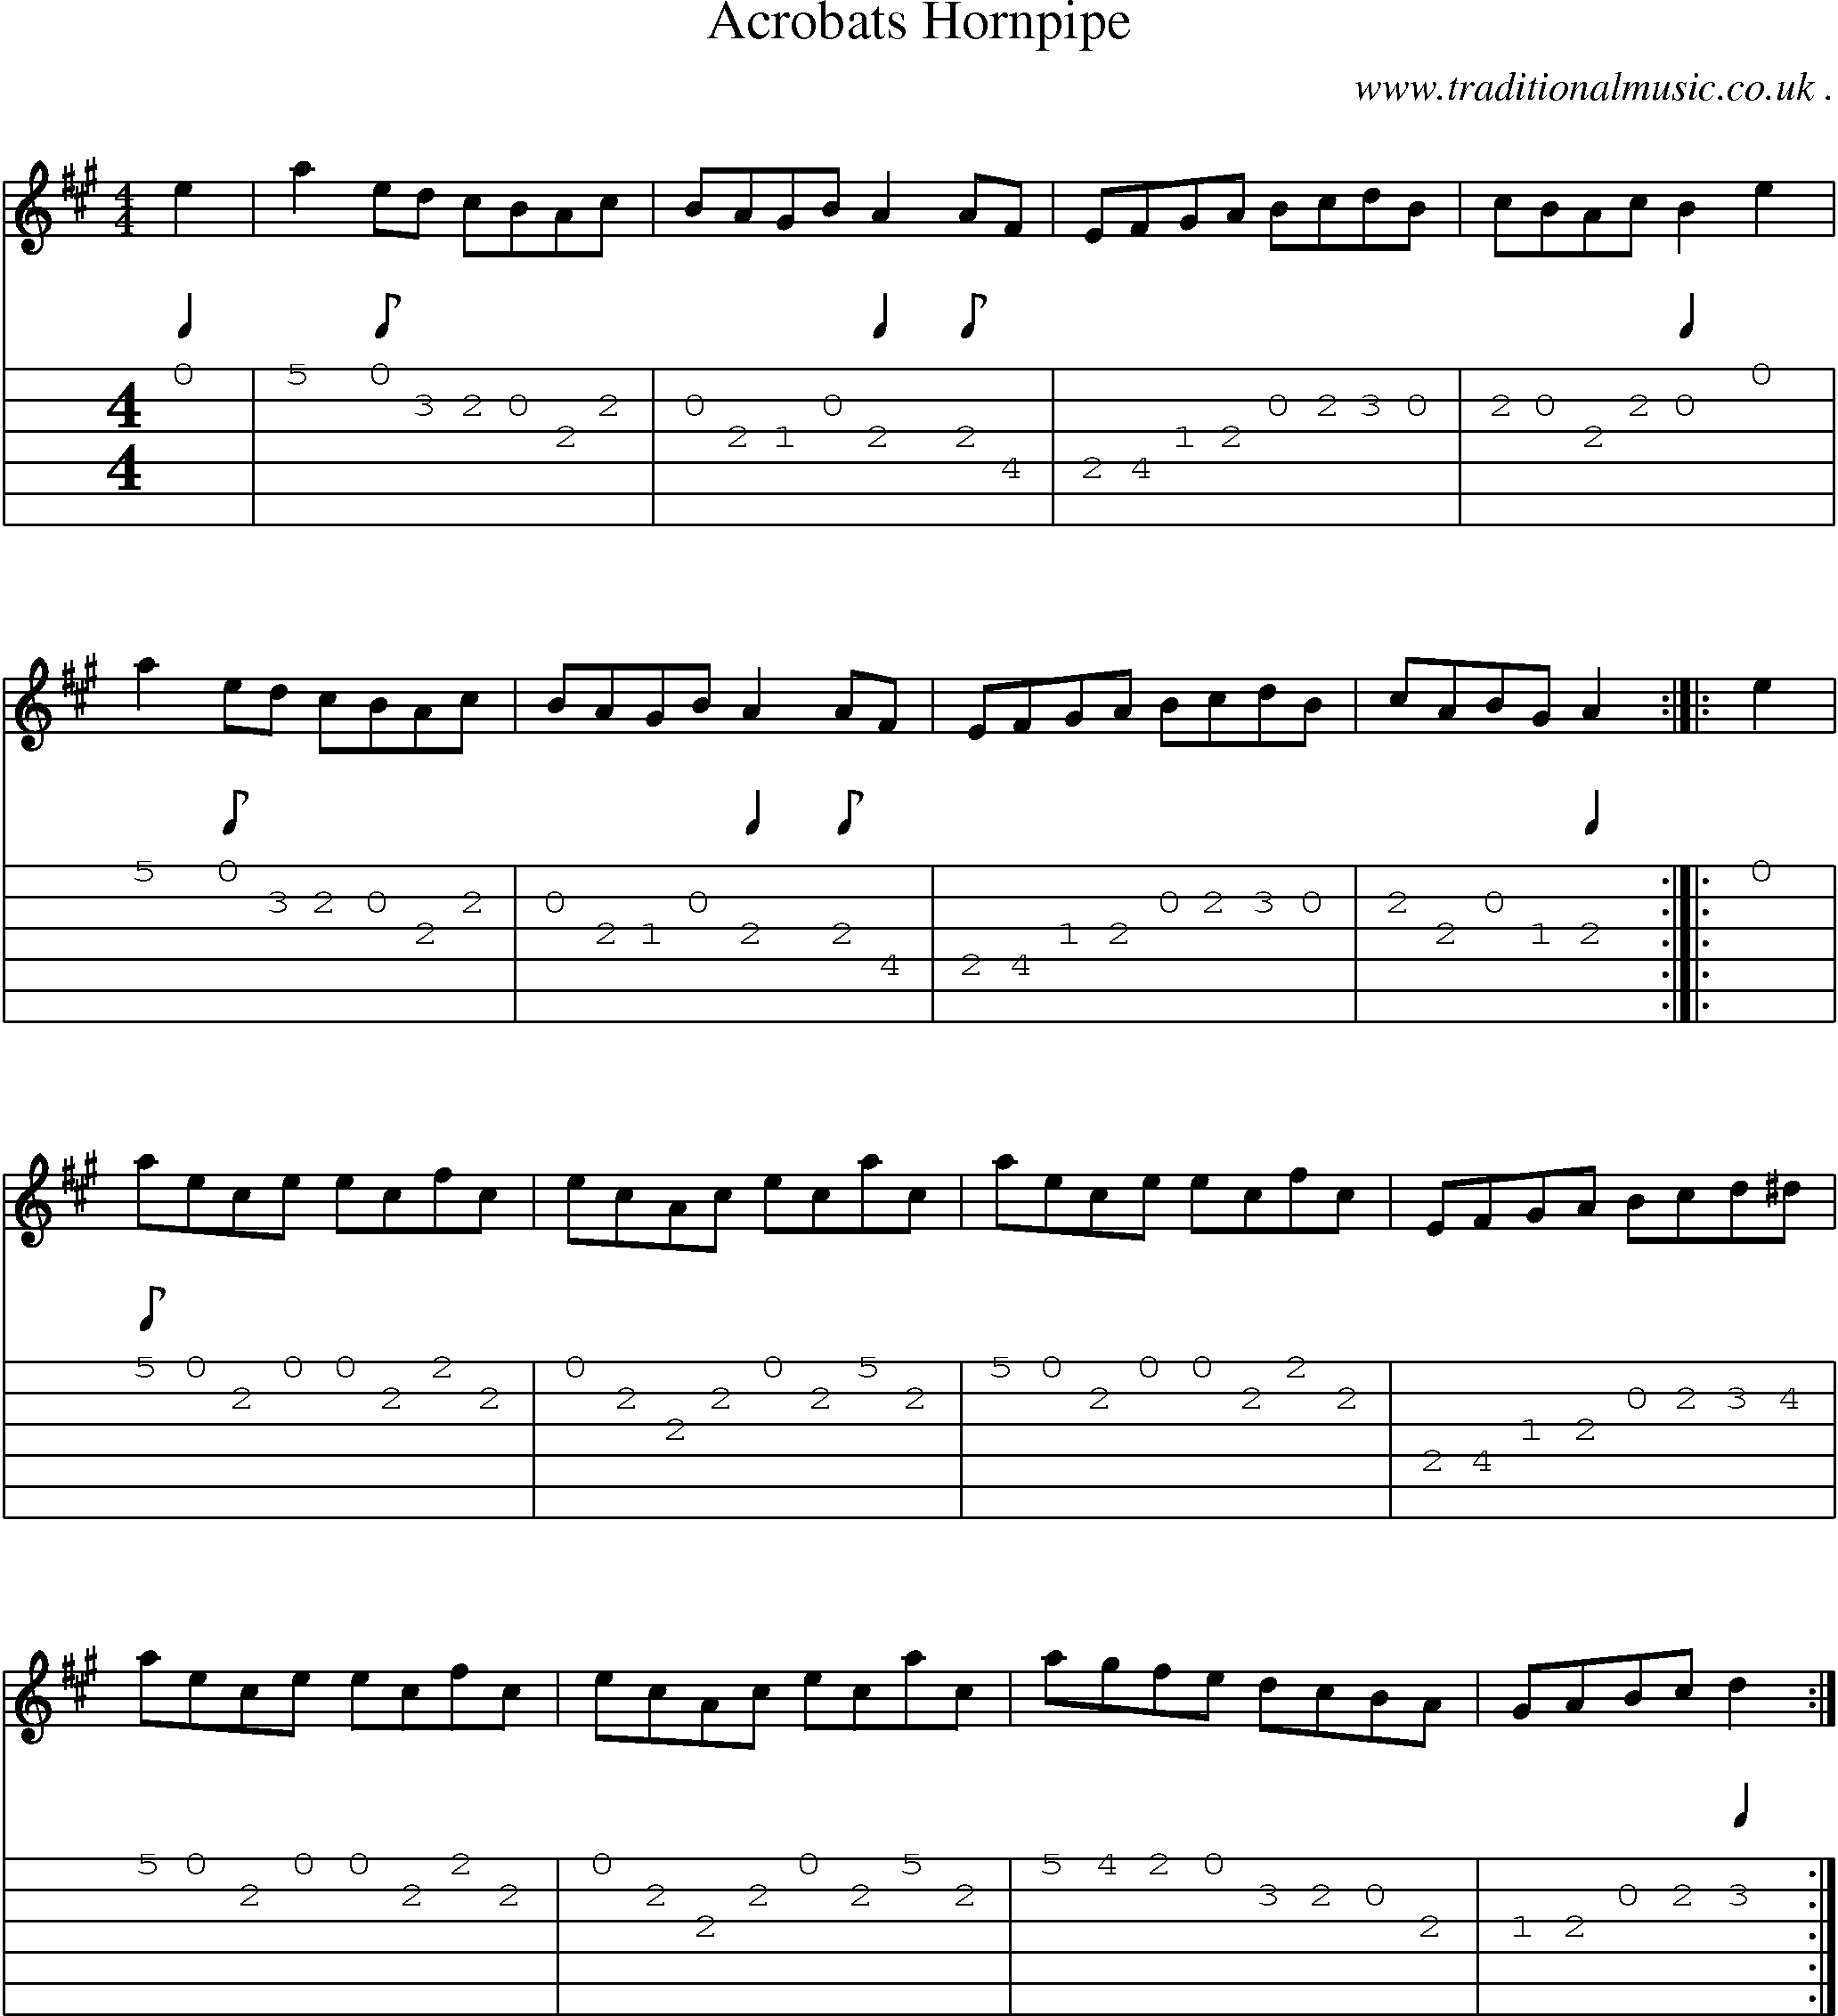 Sheet-Music and Guitar Tabs for Acrobats Hornpipe